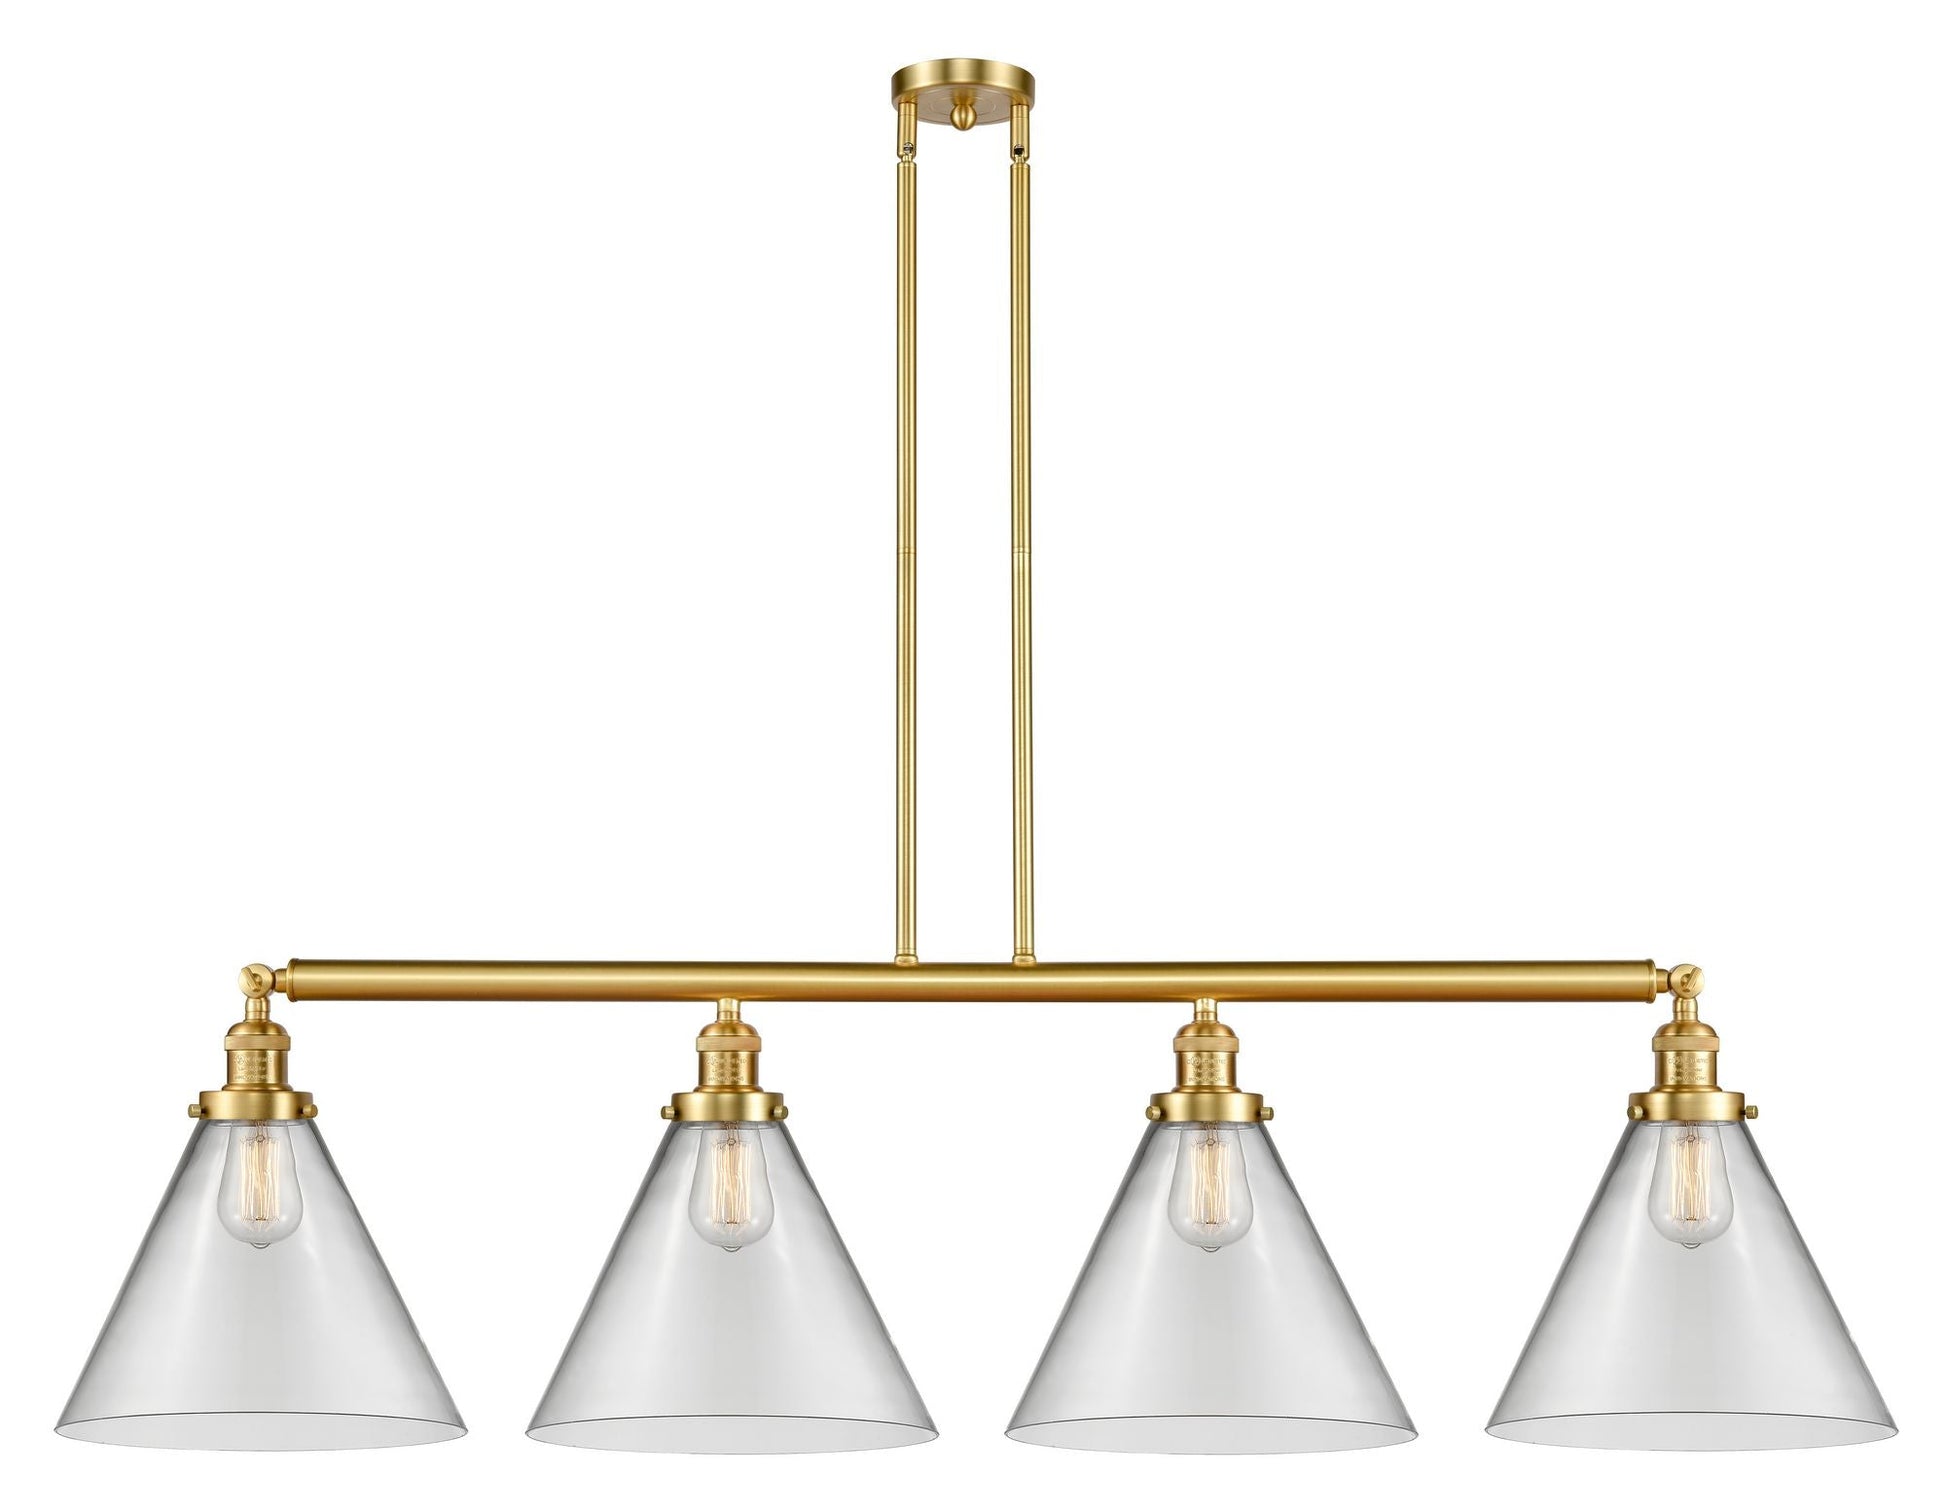 214-SG-G42-L 4-Light 56" Satin Gold Island Light - Clear Cone 12" Glass - LED Bulb - Dimmensions: 56 x 12 x 14<br>Minimum Height : 24.25<br>Maximum Height : 48.25 - Sloped Ceiling Compatible: Yes